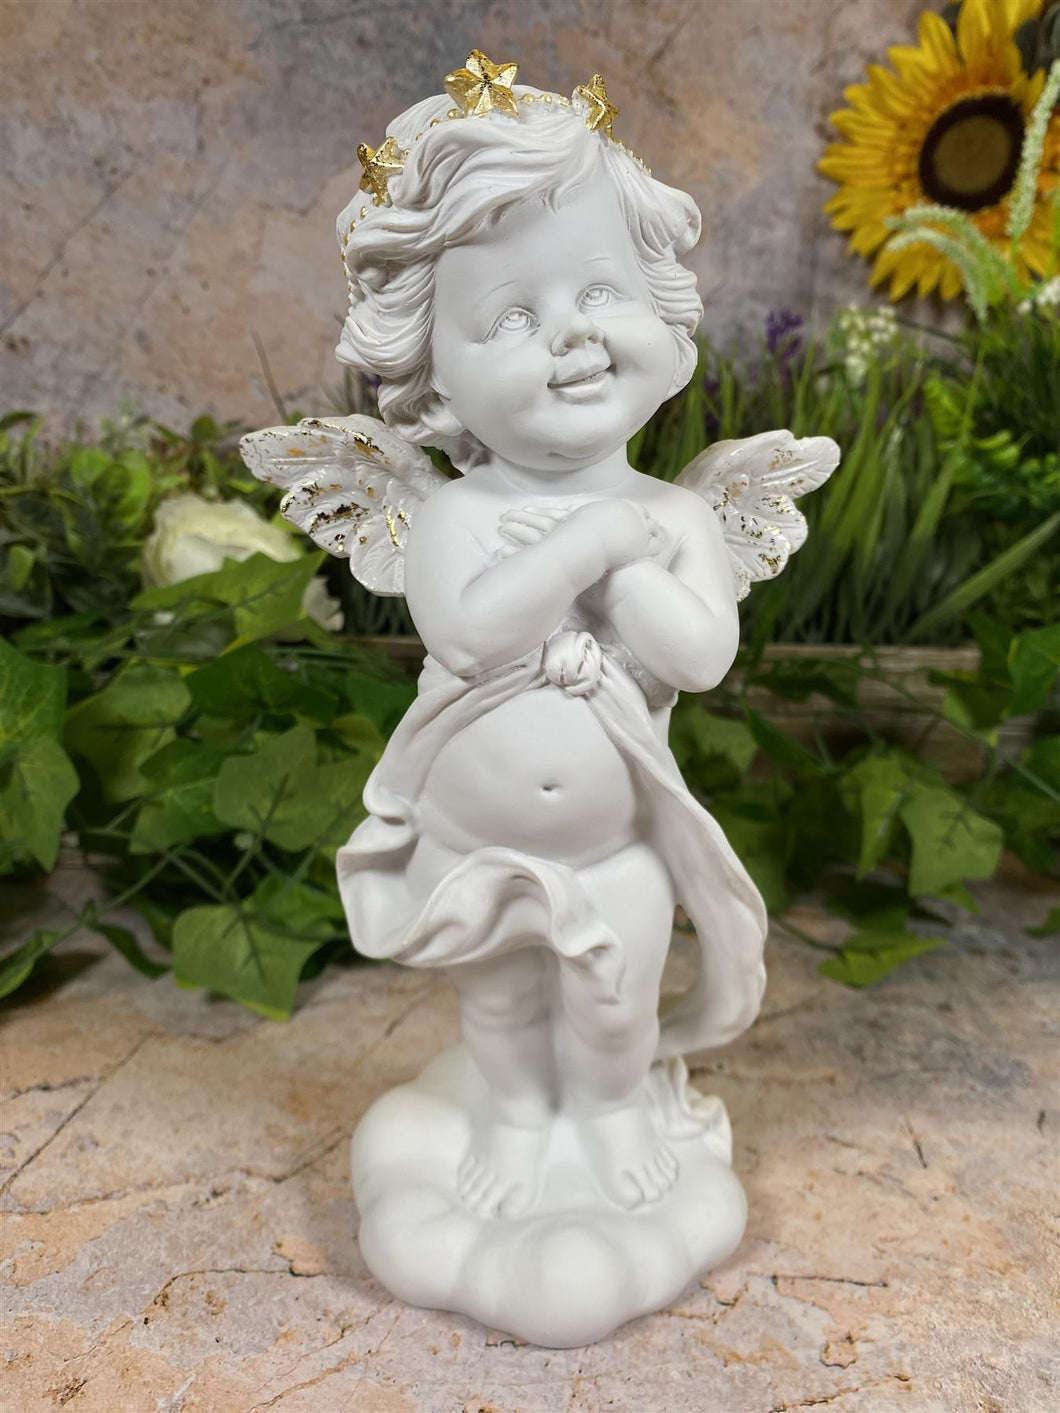 Enchanting Cherub Angel Statue with Gilded Accents - Elegantly Crafted Resin Cherub - Heavenly Nursery Decor - Boxed for Gifting"